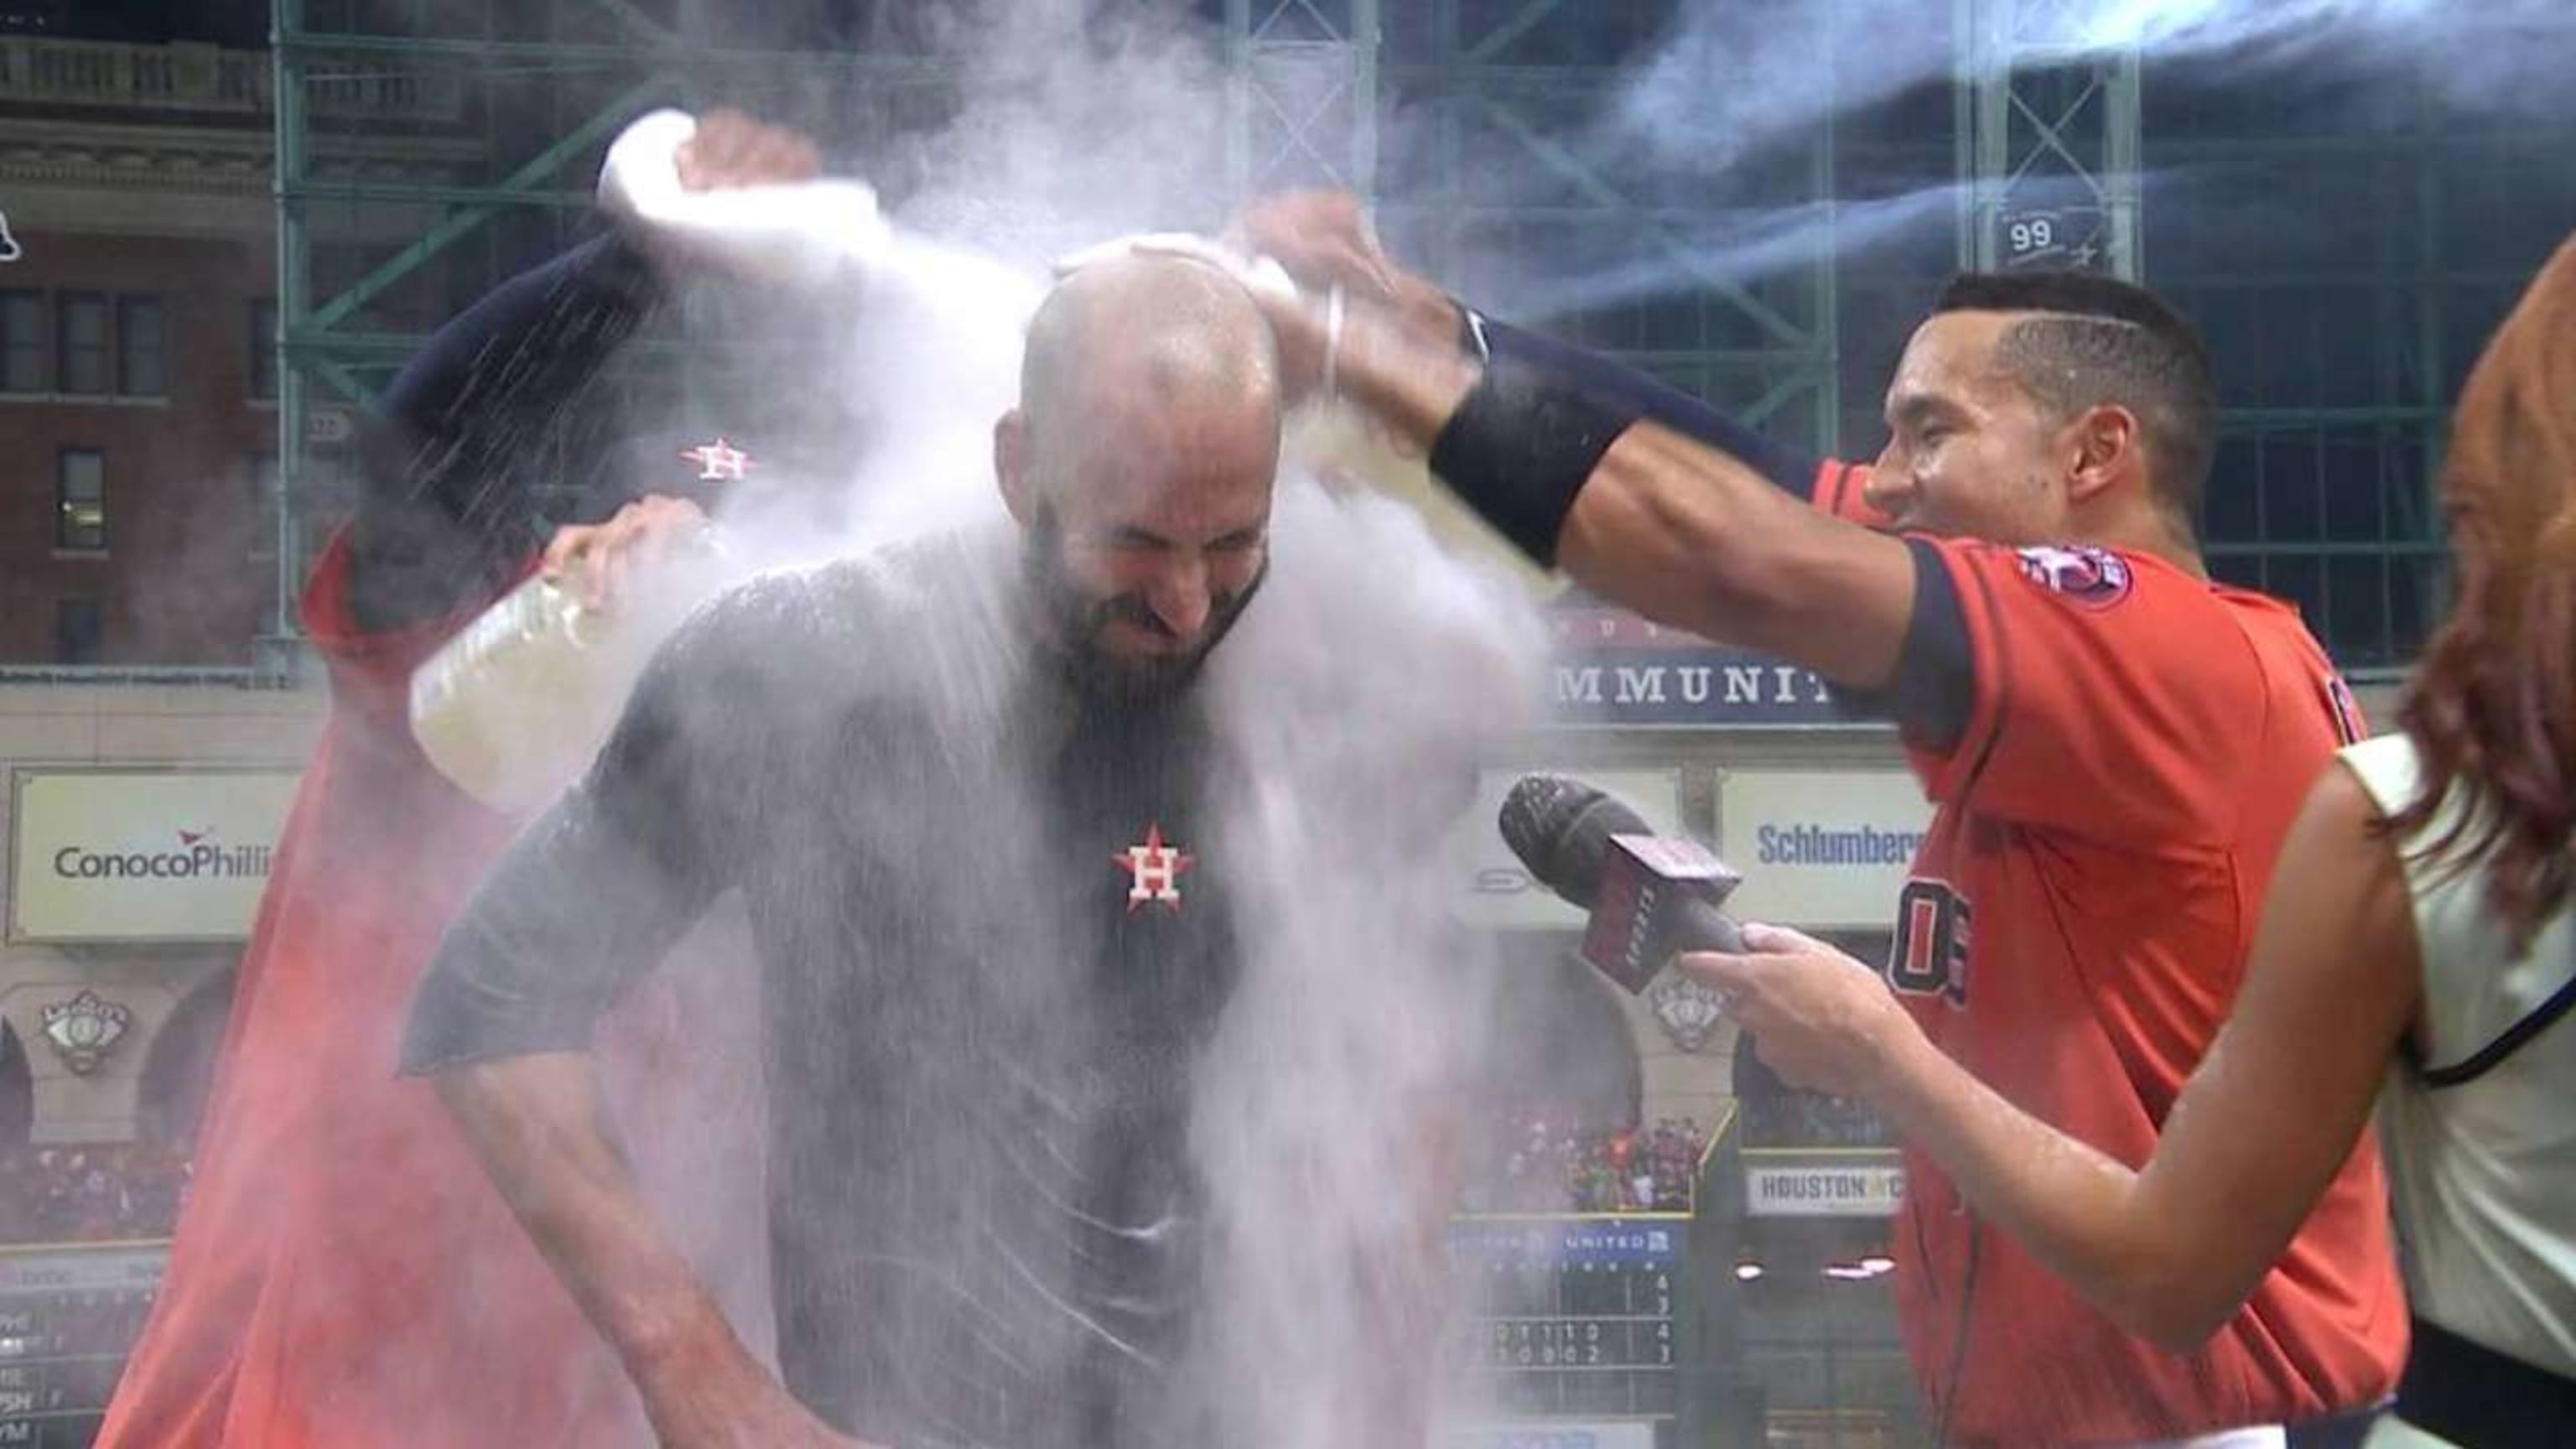 Houston's Mike Fiers throws no-hitter in Houston Astros' 3-0